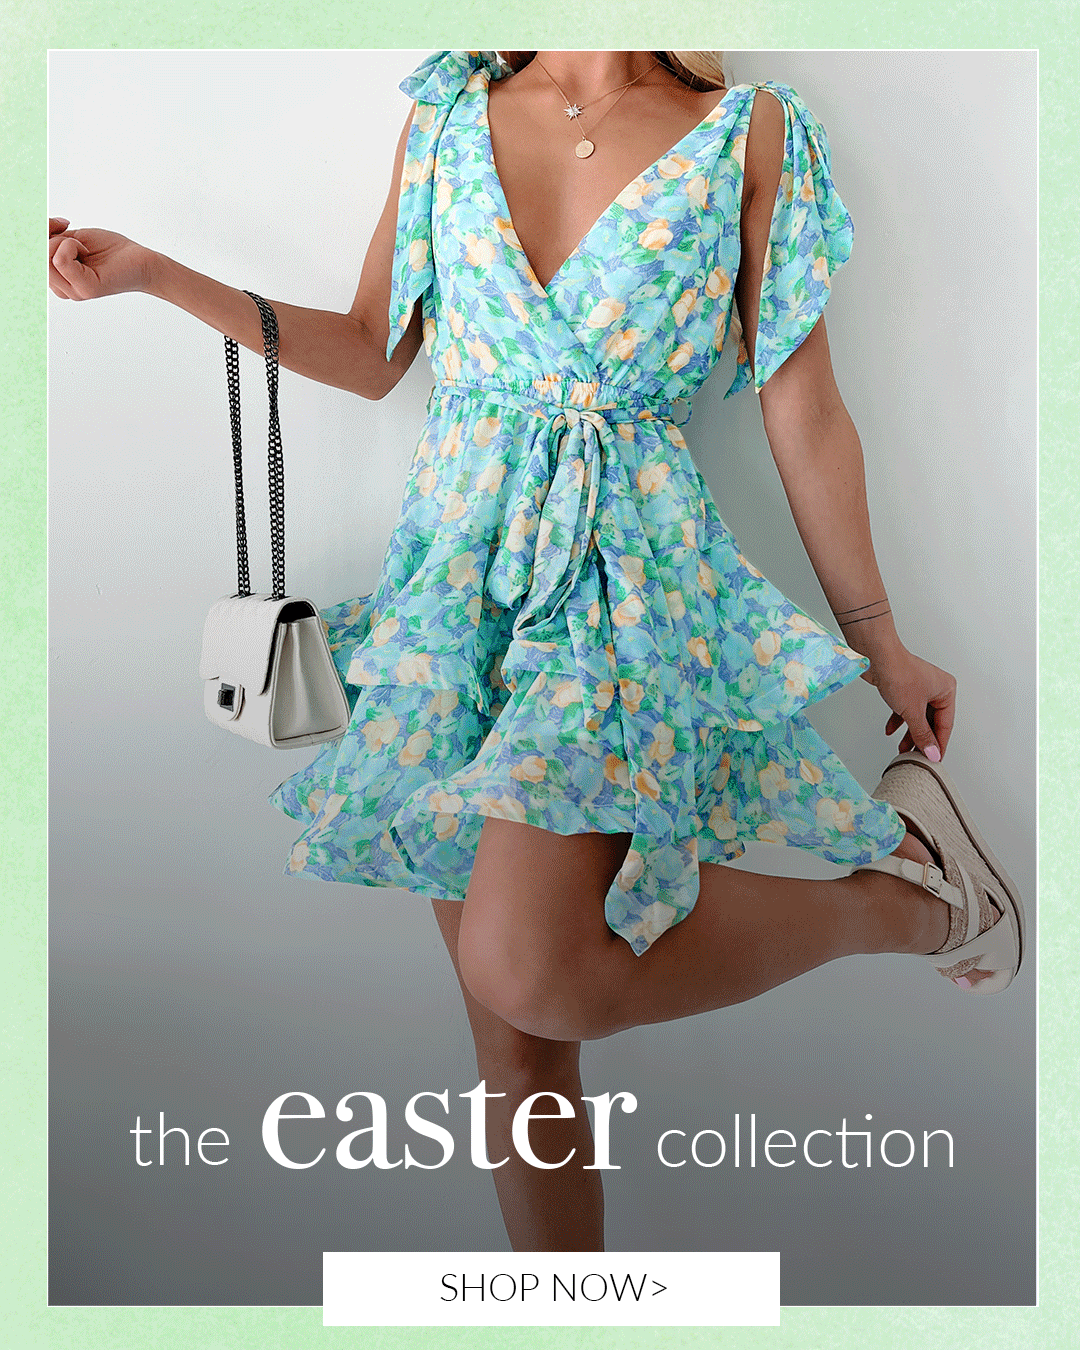 Slideshow of models wearing easter dresses and sets. Headline says "The Easter Collection". Call to action says "Shop Now" and links to the Easter Collection